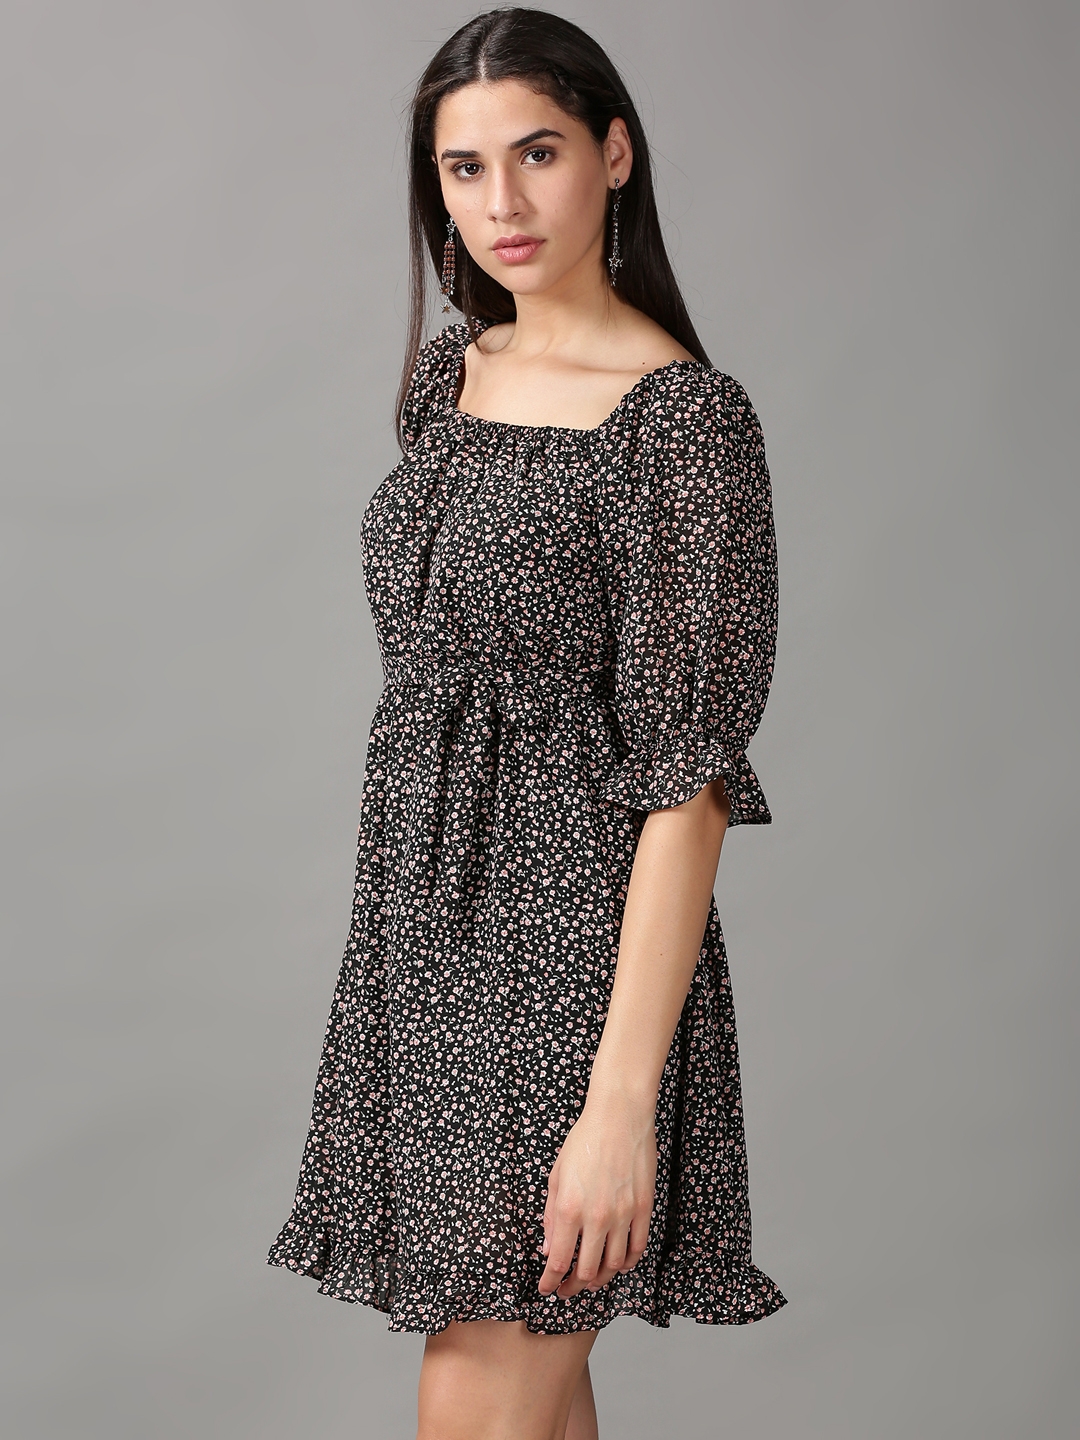 Showoff | SHOWOFF Women Black Printed Square Neck Three-Quarter Sleeves Above Knee Fit and Flare Dress 2